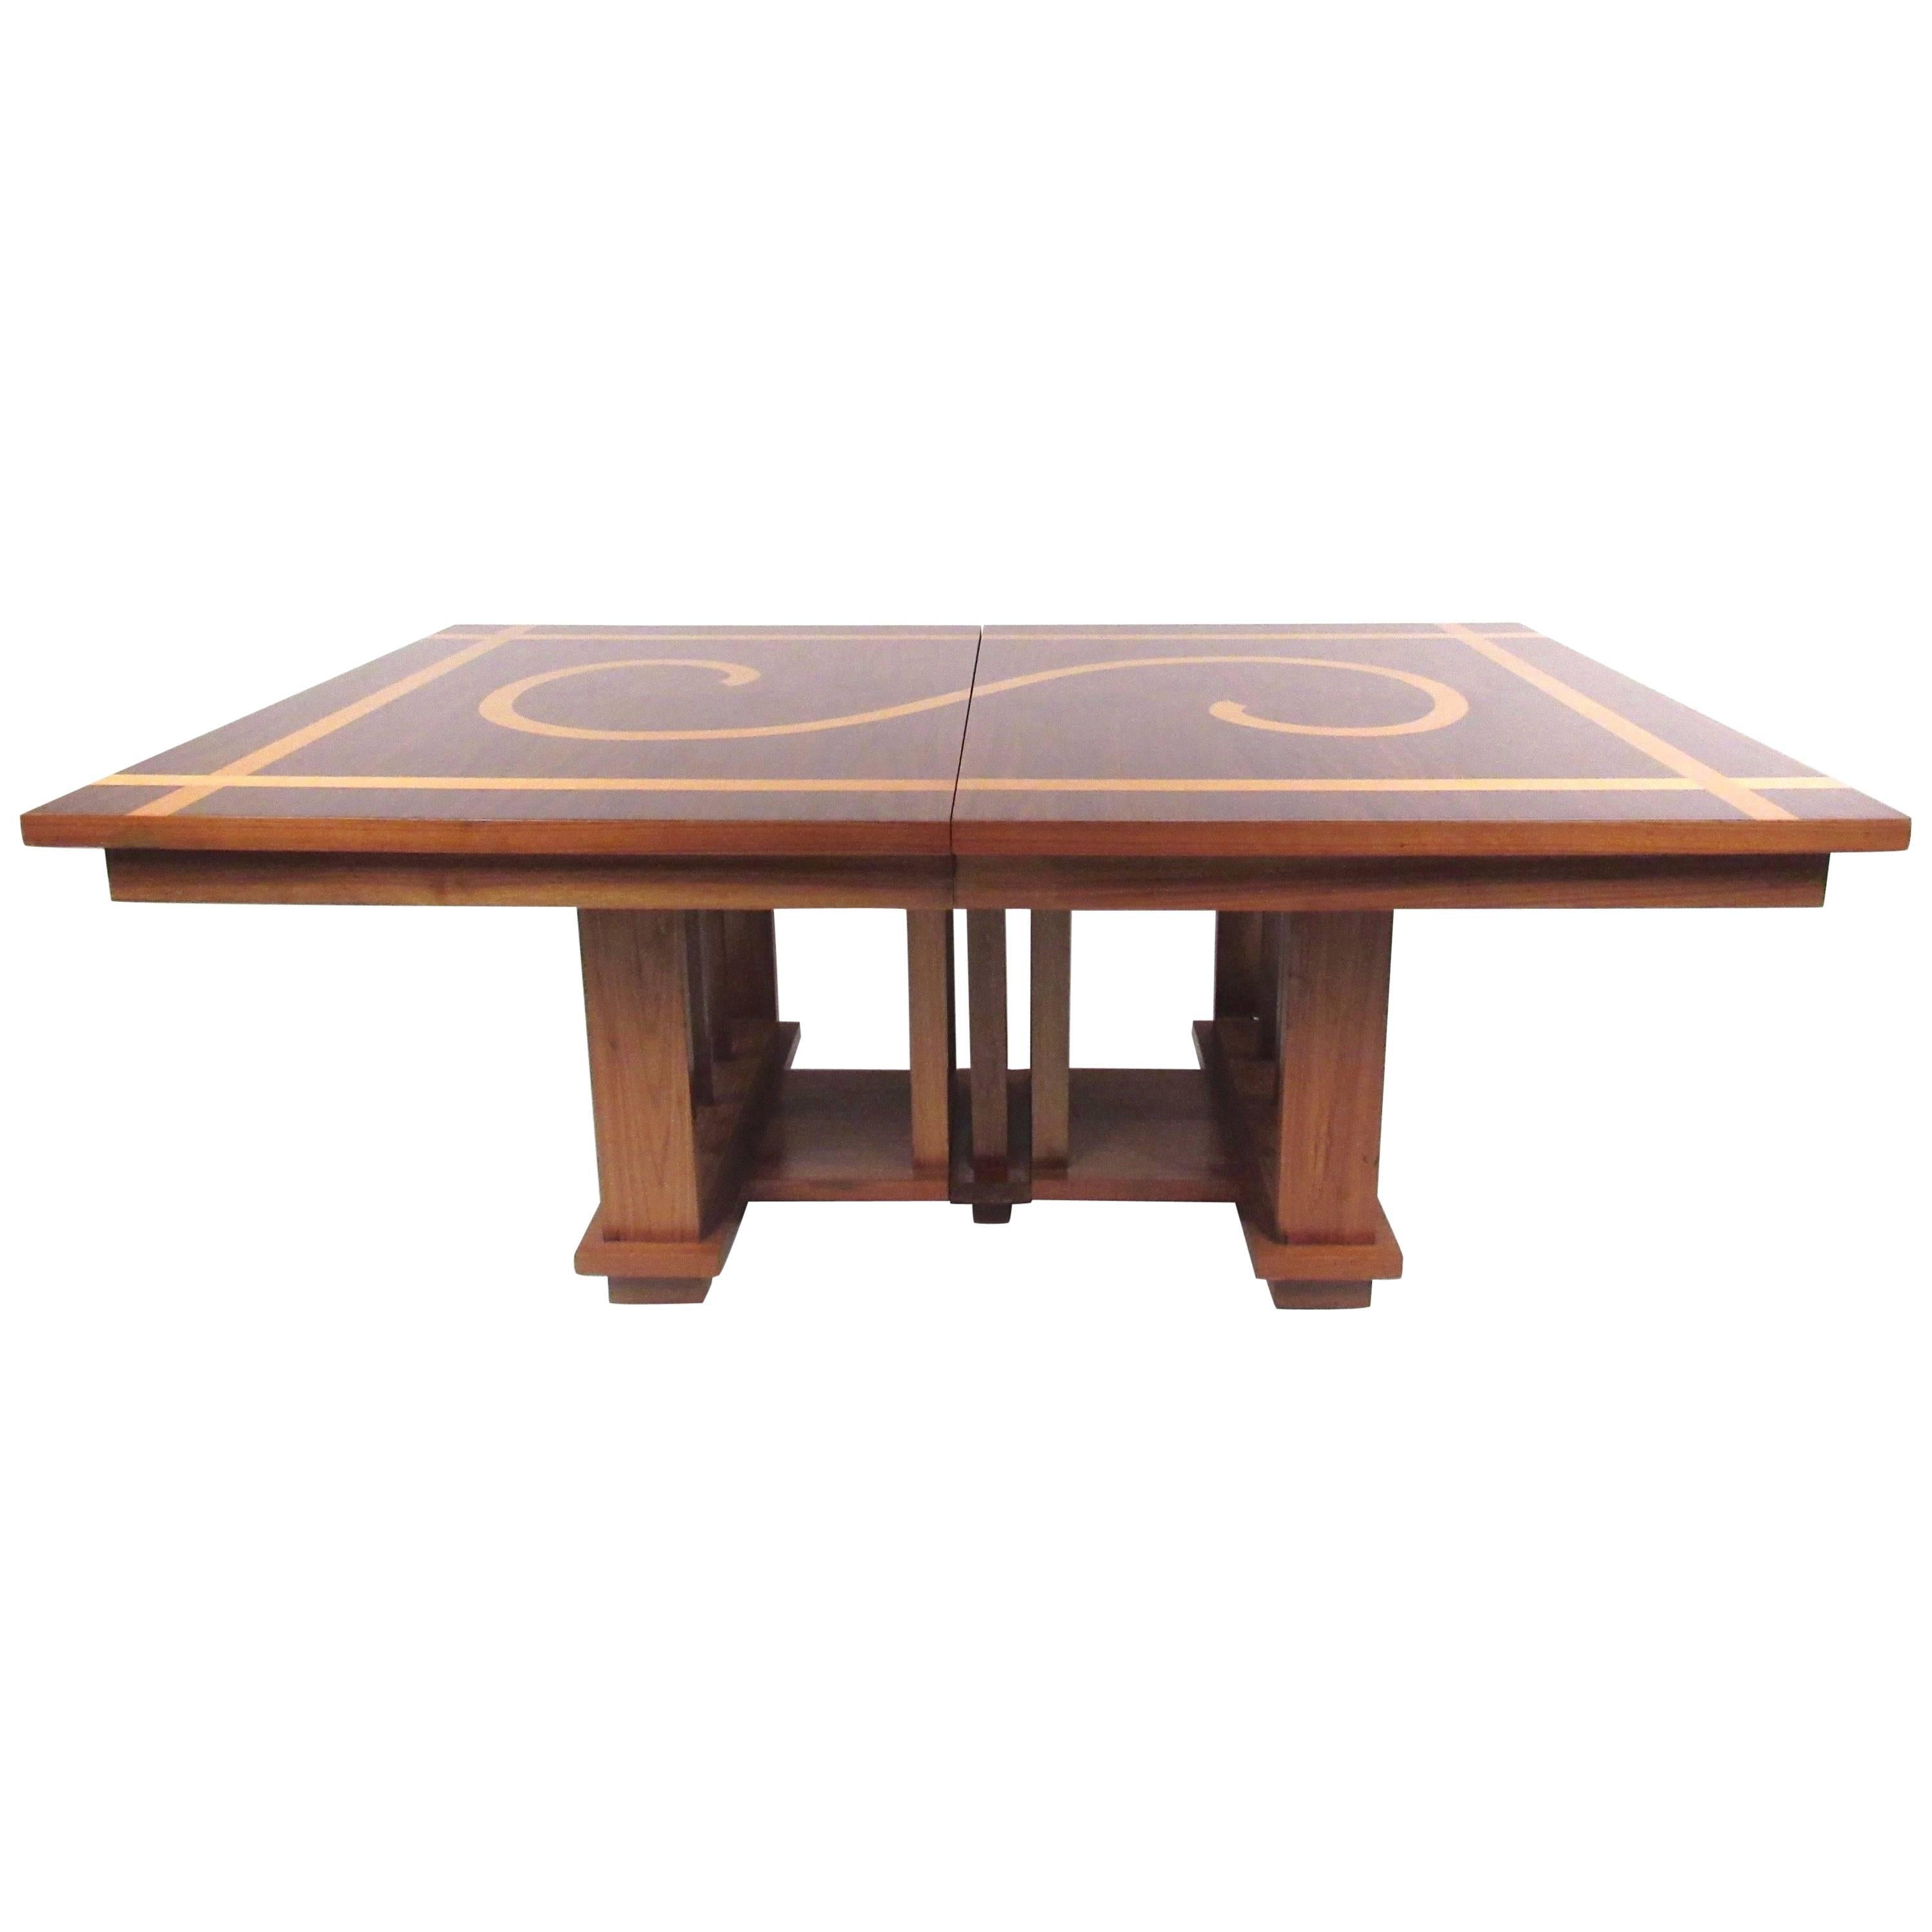 Impressive Dining Table in the Style of Frank Lloyd Wright